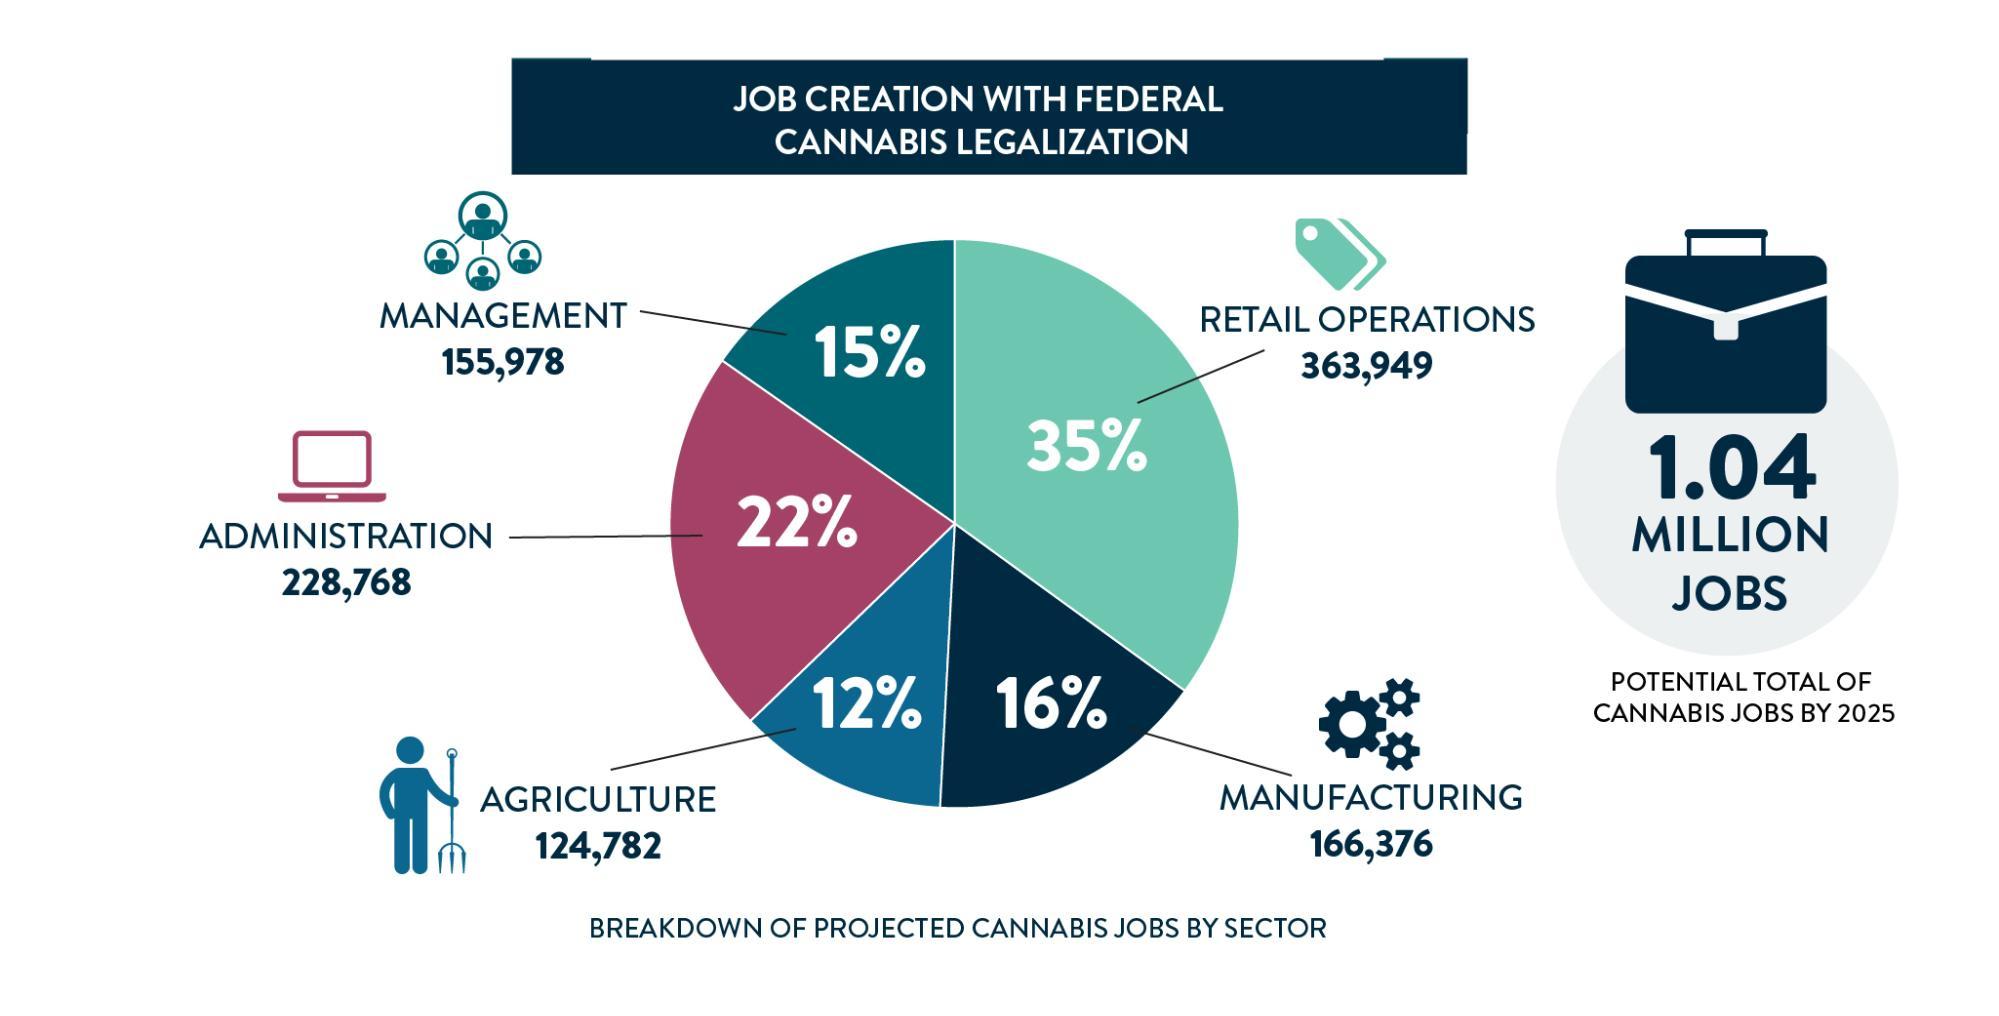 predicted job creation with federal cannabis legalization